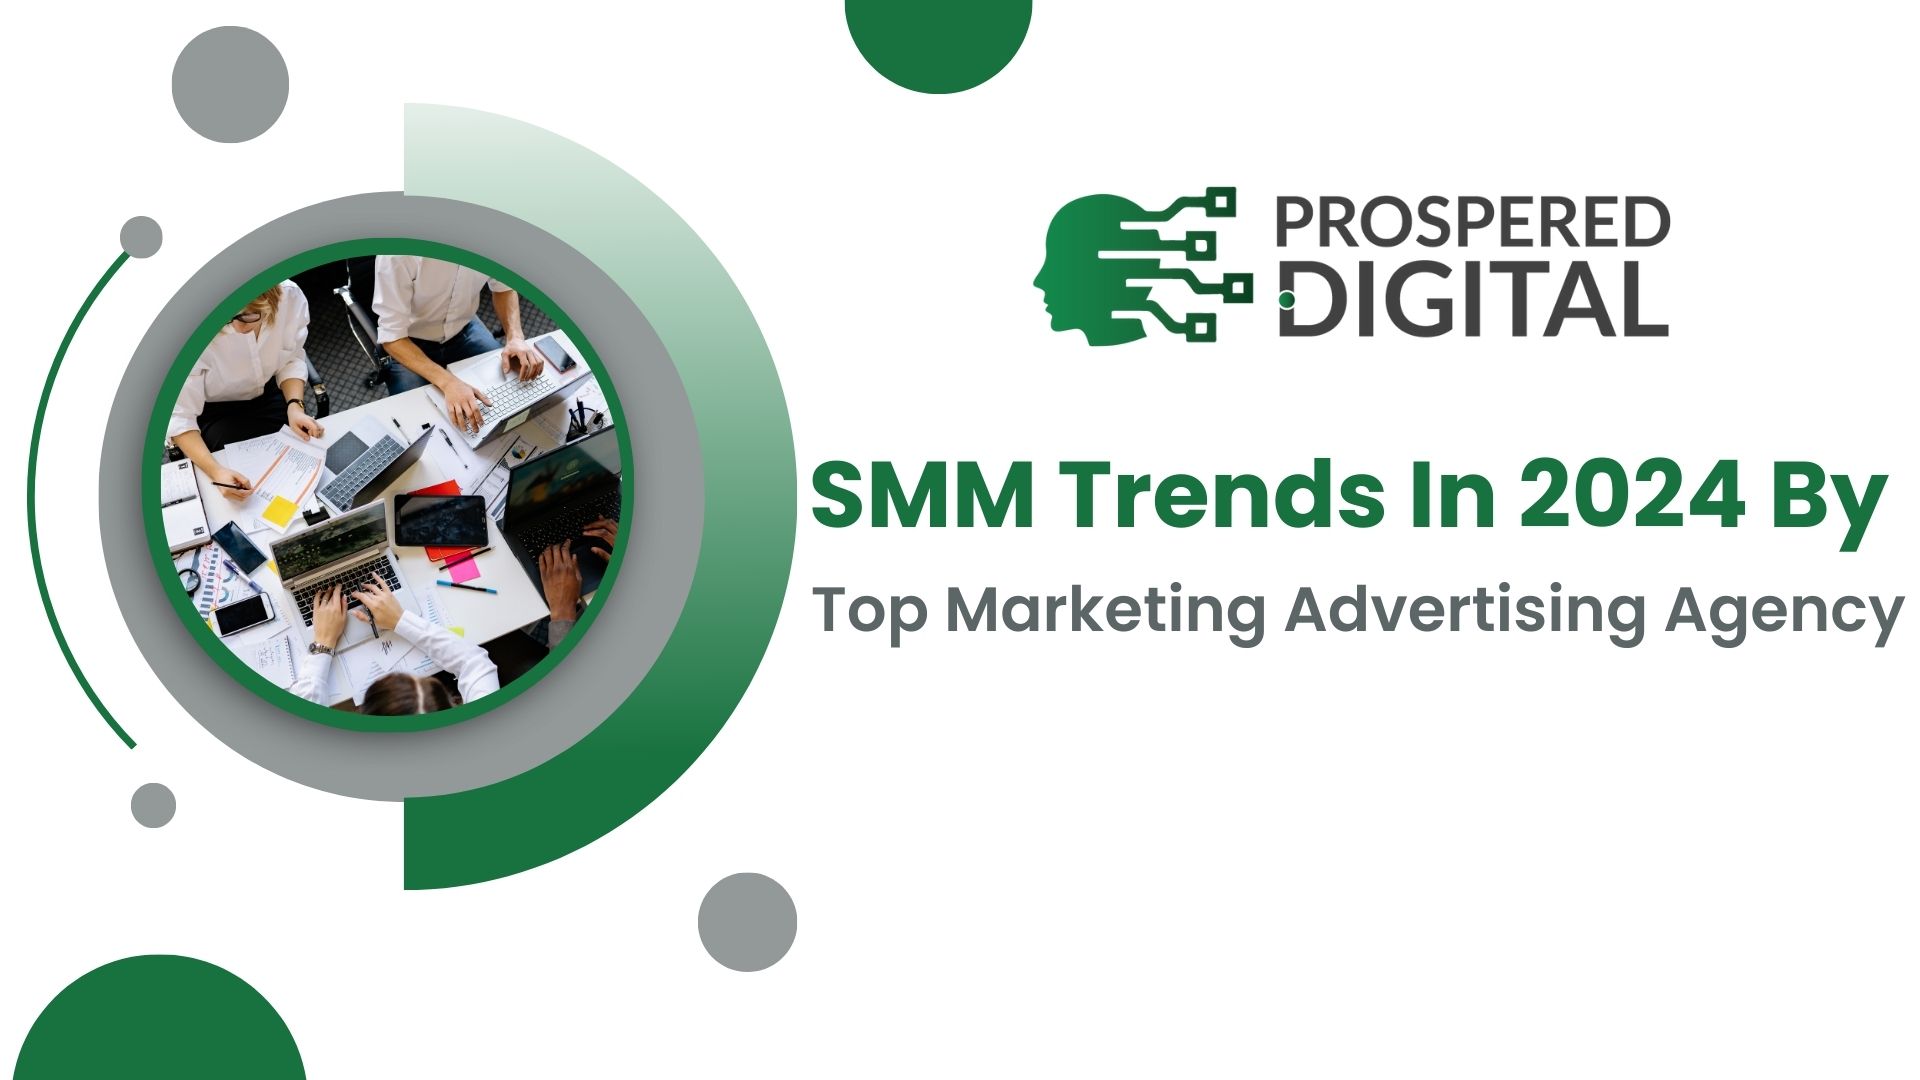 SMM Trends In 2024 By Top Marketing Advertising Agency